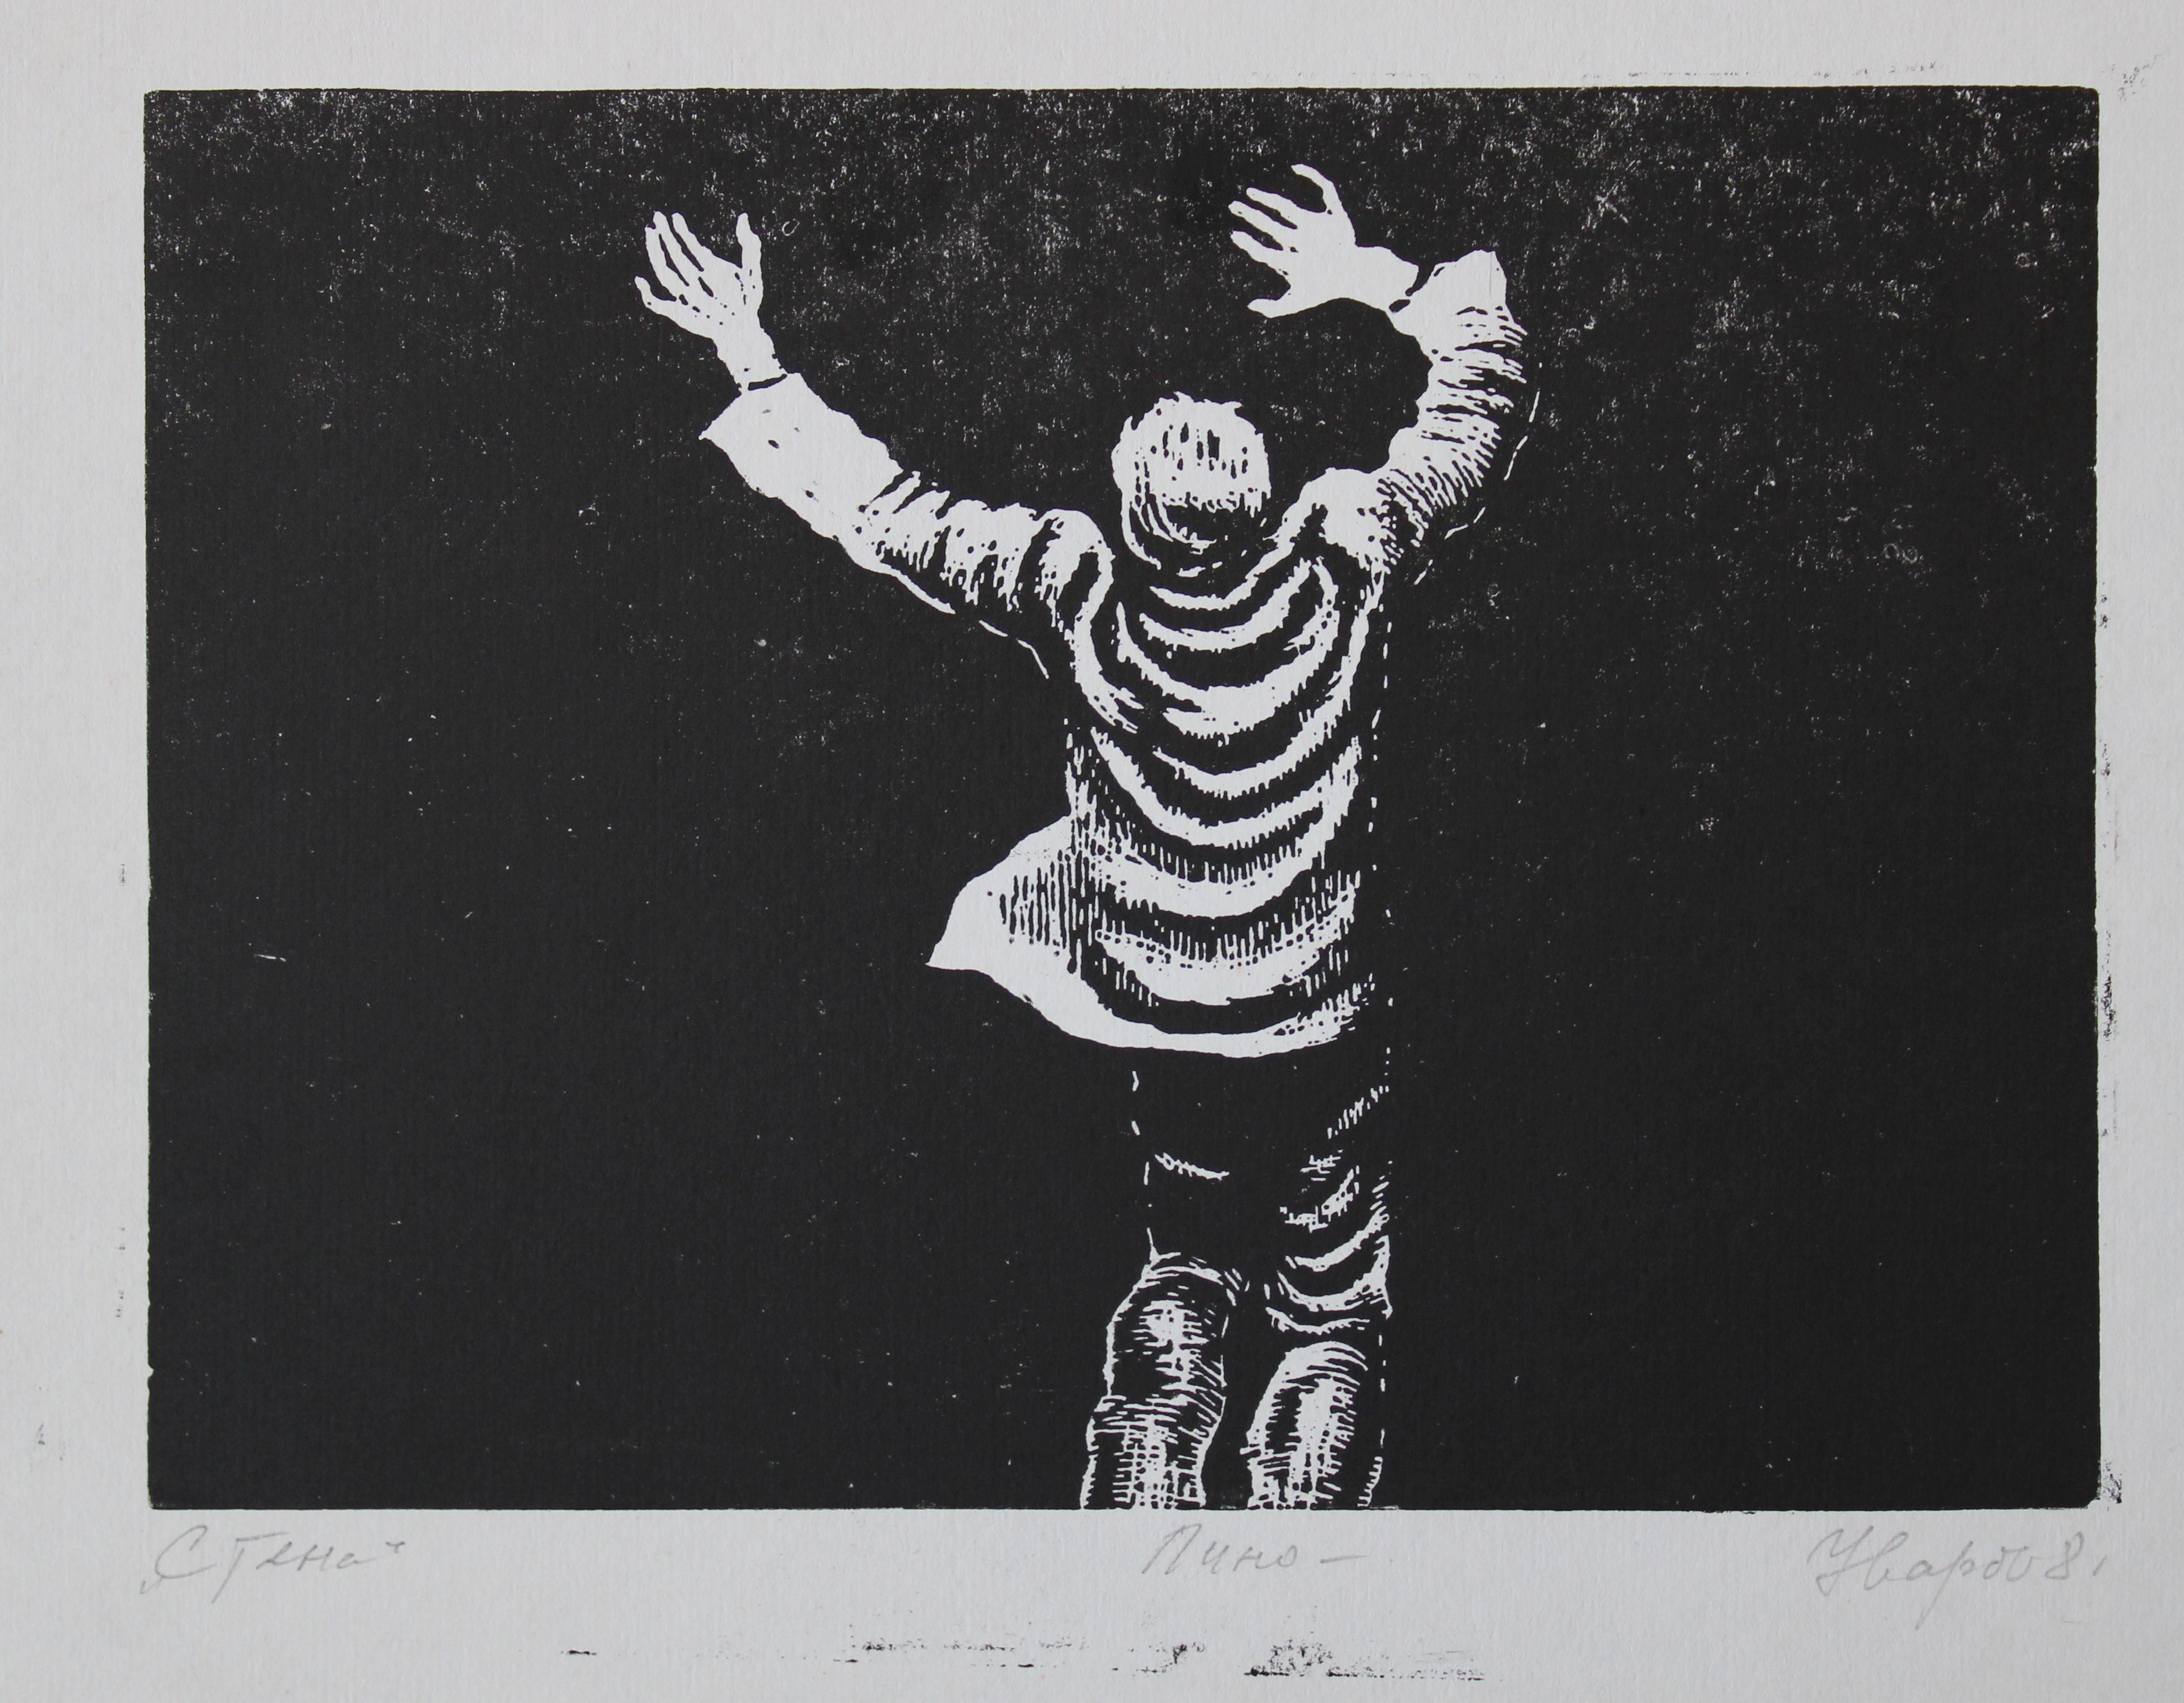 Wall

1968, paper, linocut, 20.5x28 cm

The linocut print depicts a boy standing in what appears to be a dark or shadowy environment. The artist uses the linocut technique to create bold lines and textures that give the image a distinct and graphic